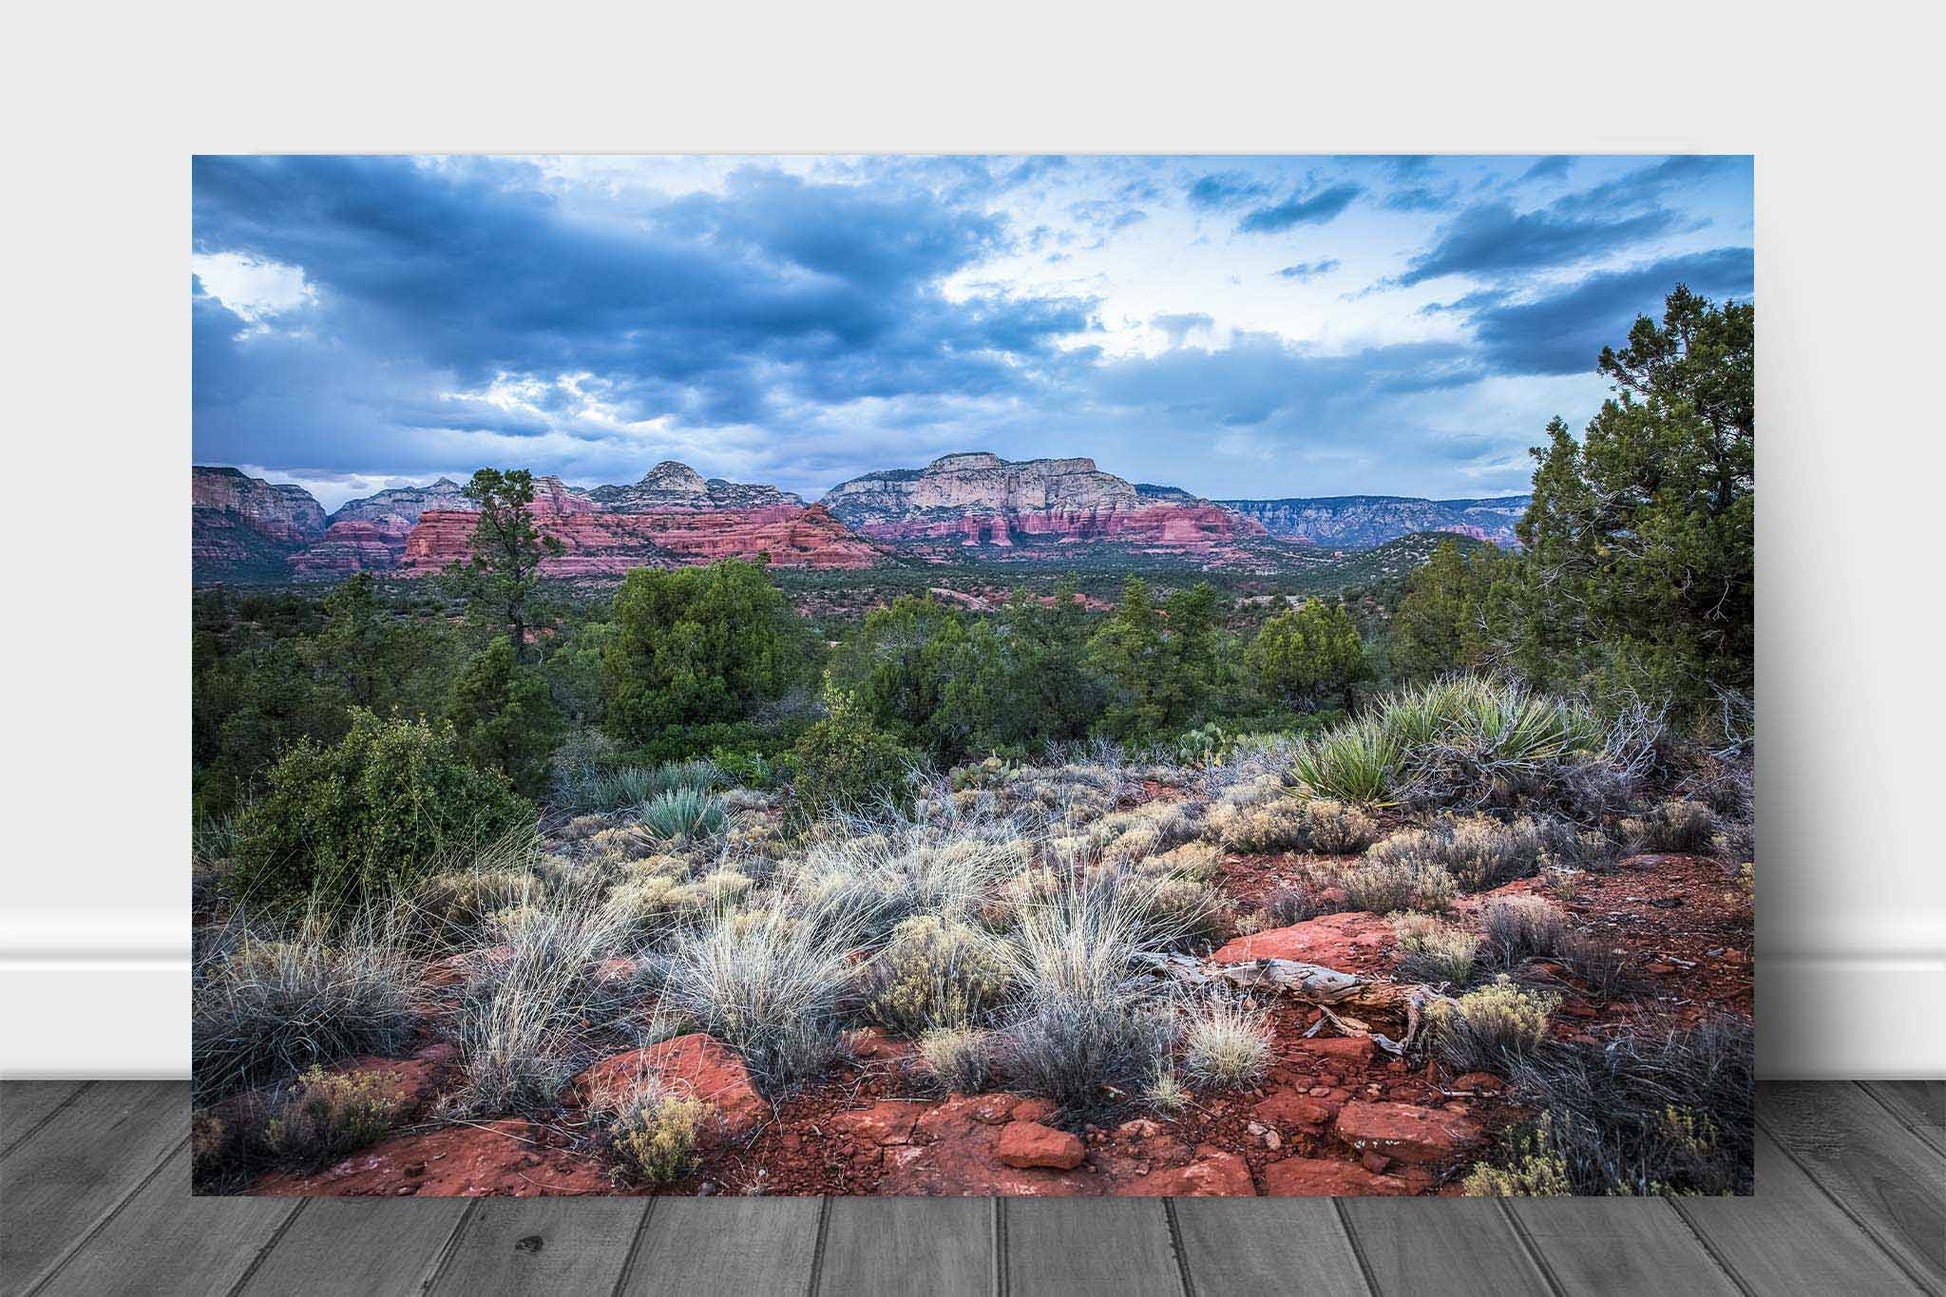 Desert southwest metal print of red rocks and desert landscape on a chilly spring evening near Sedona, Arizona by Sean Ramsey of Southern Plains Photography.